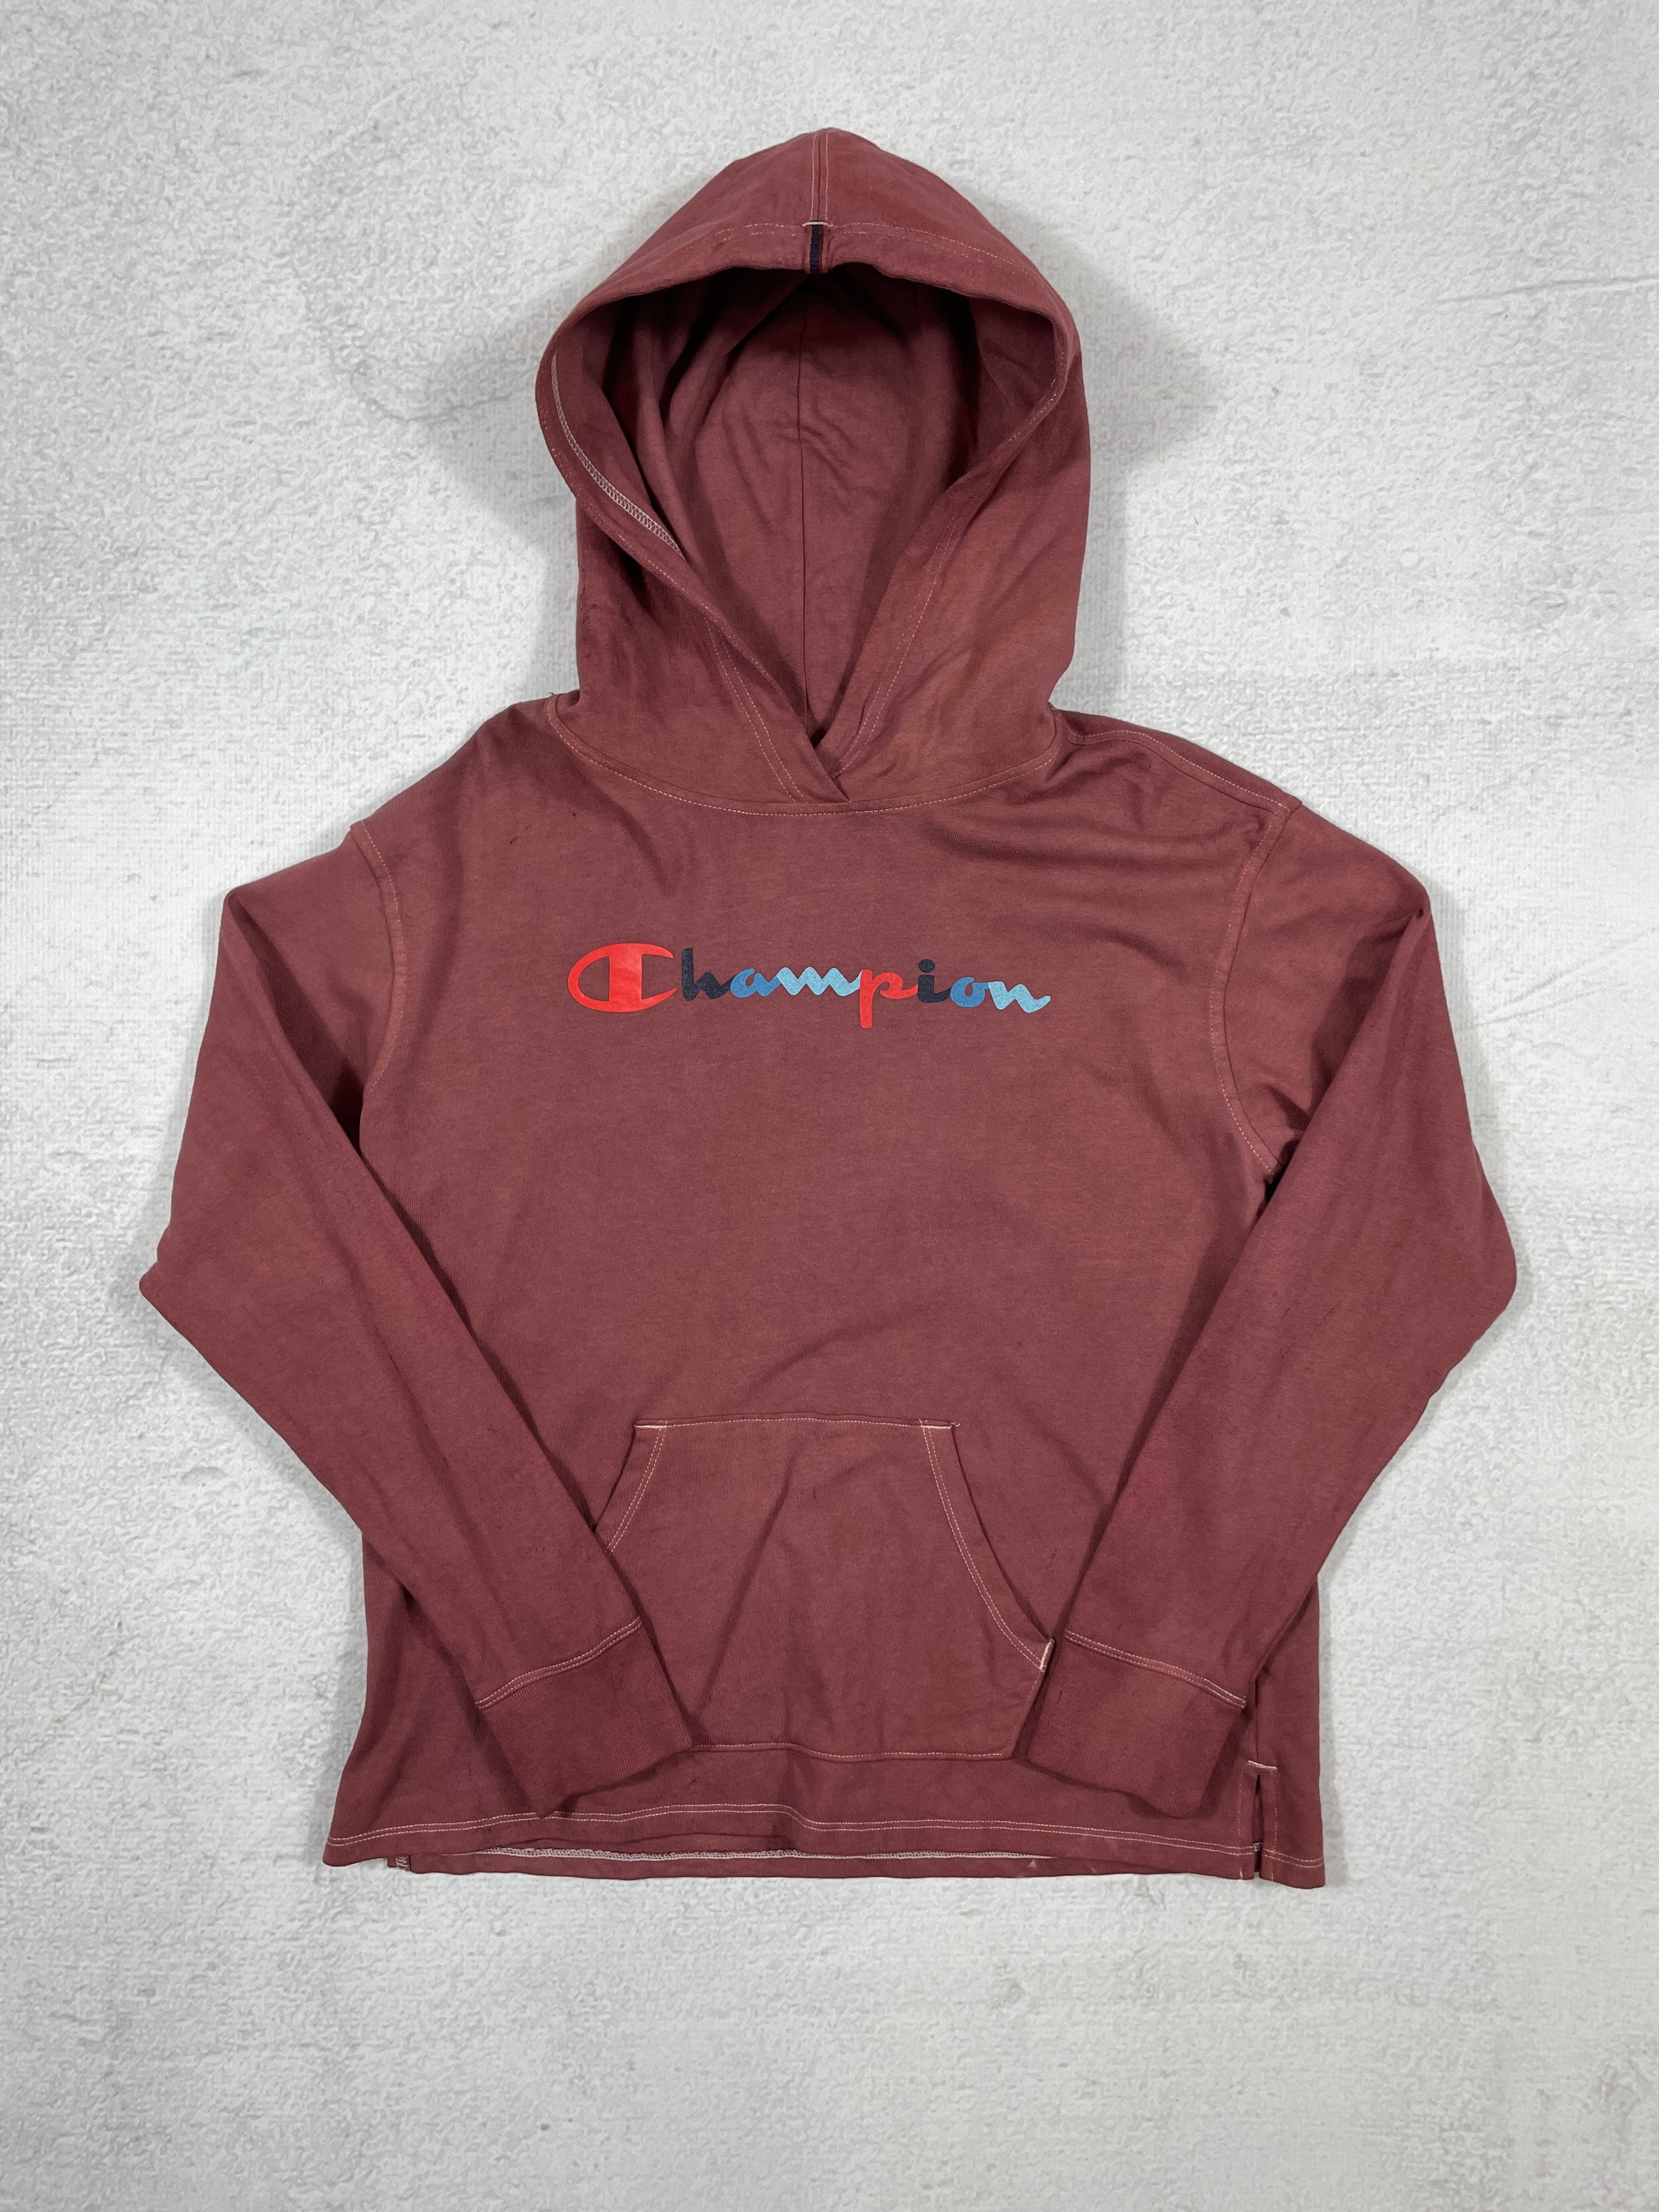 Vintage Dyed Champion Hoodie - Men's Small